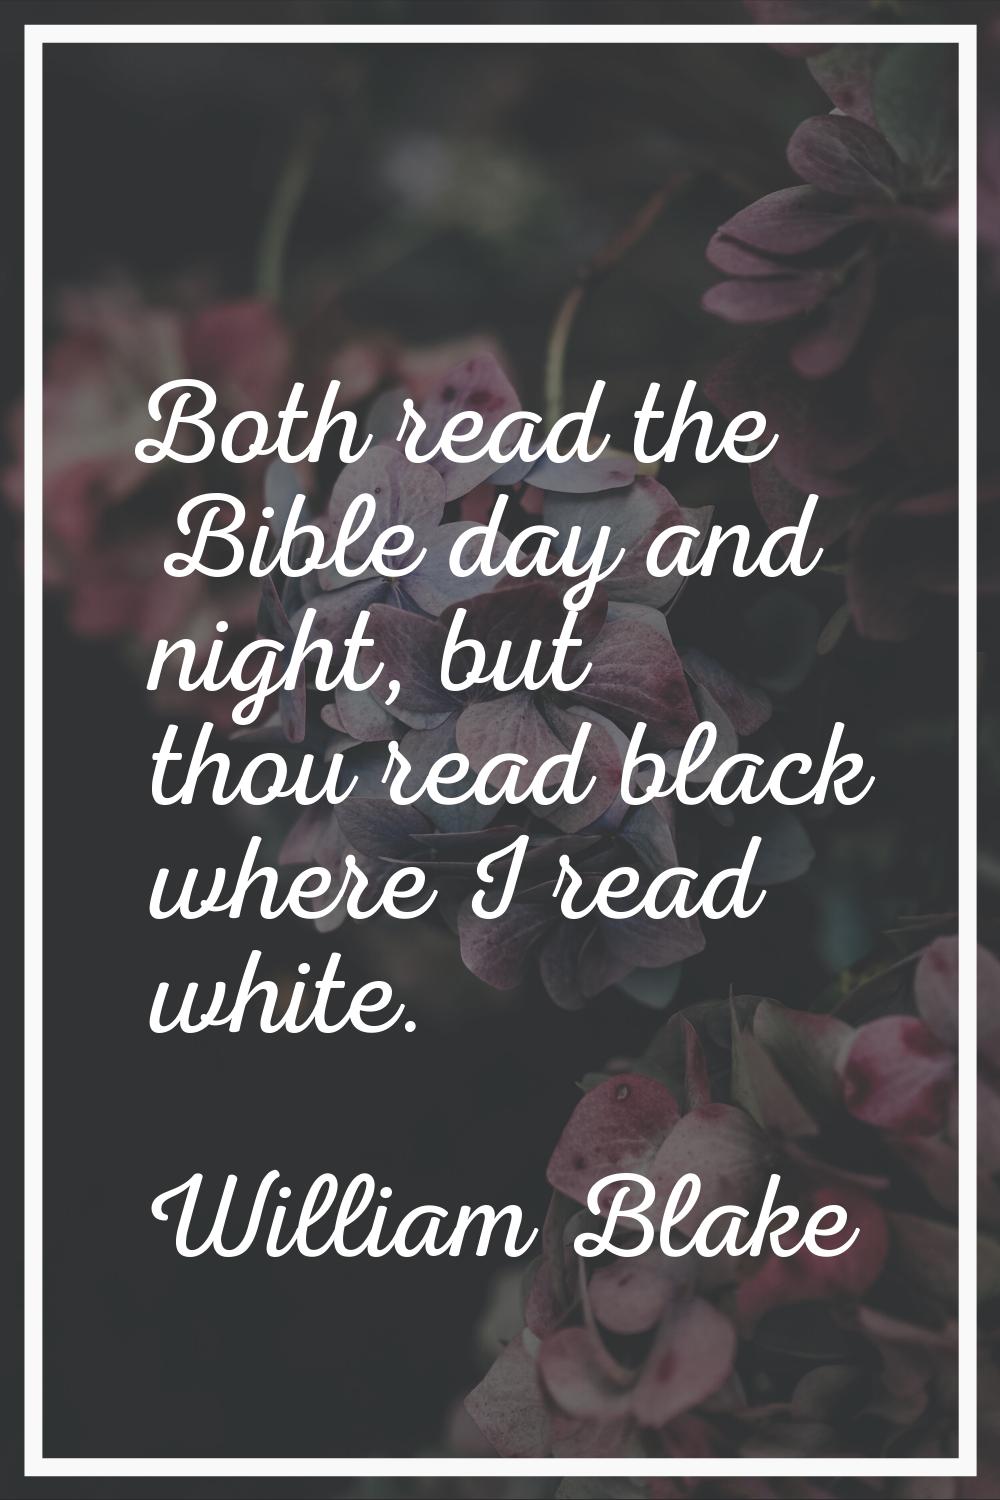 Both read the Bible day and night, but thou read black where I read white.